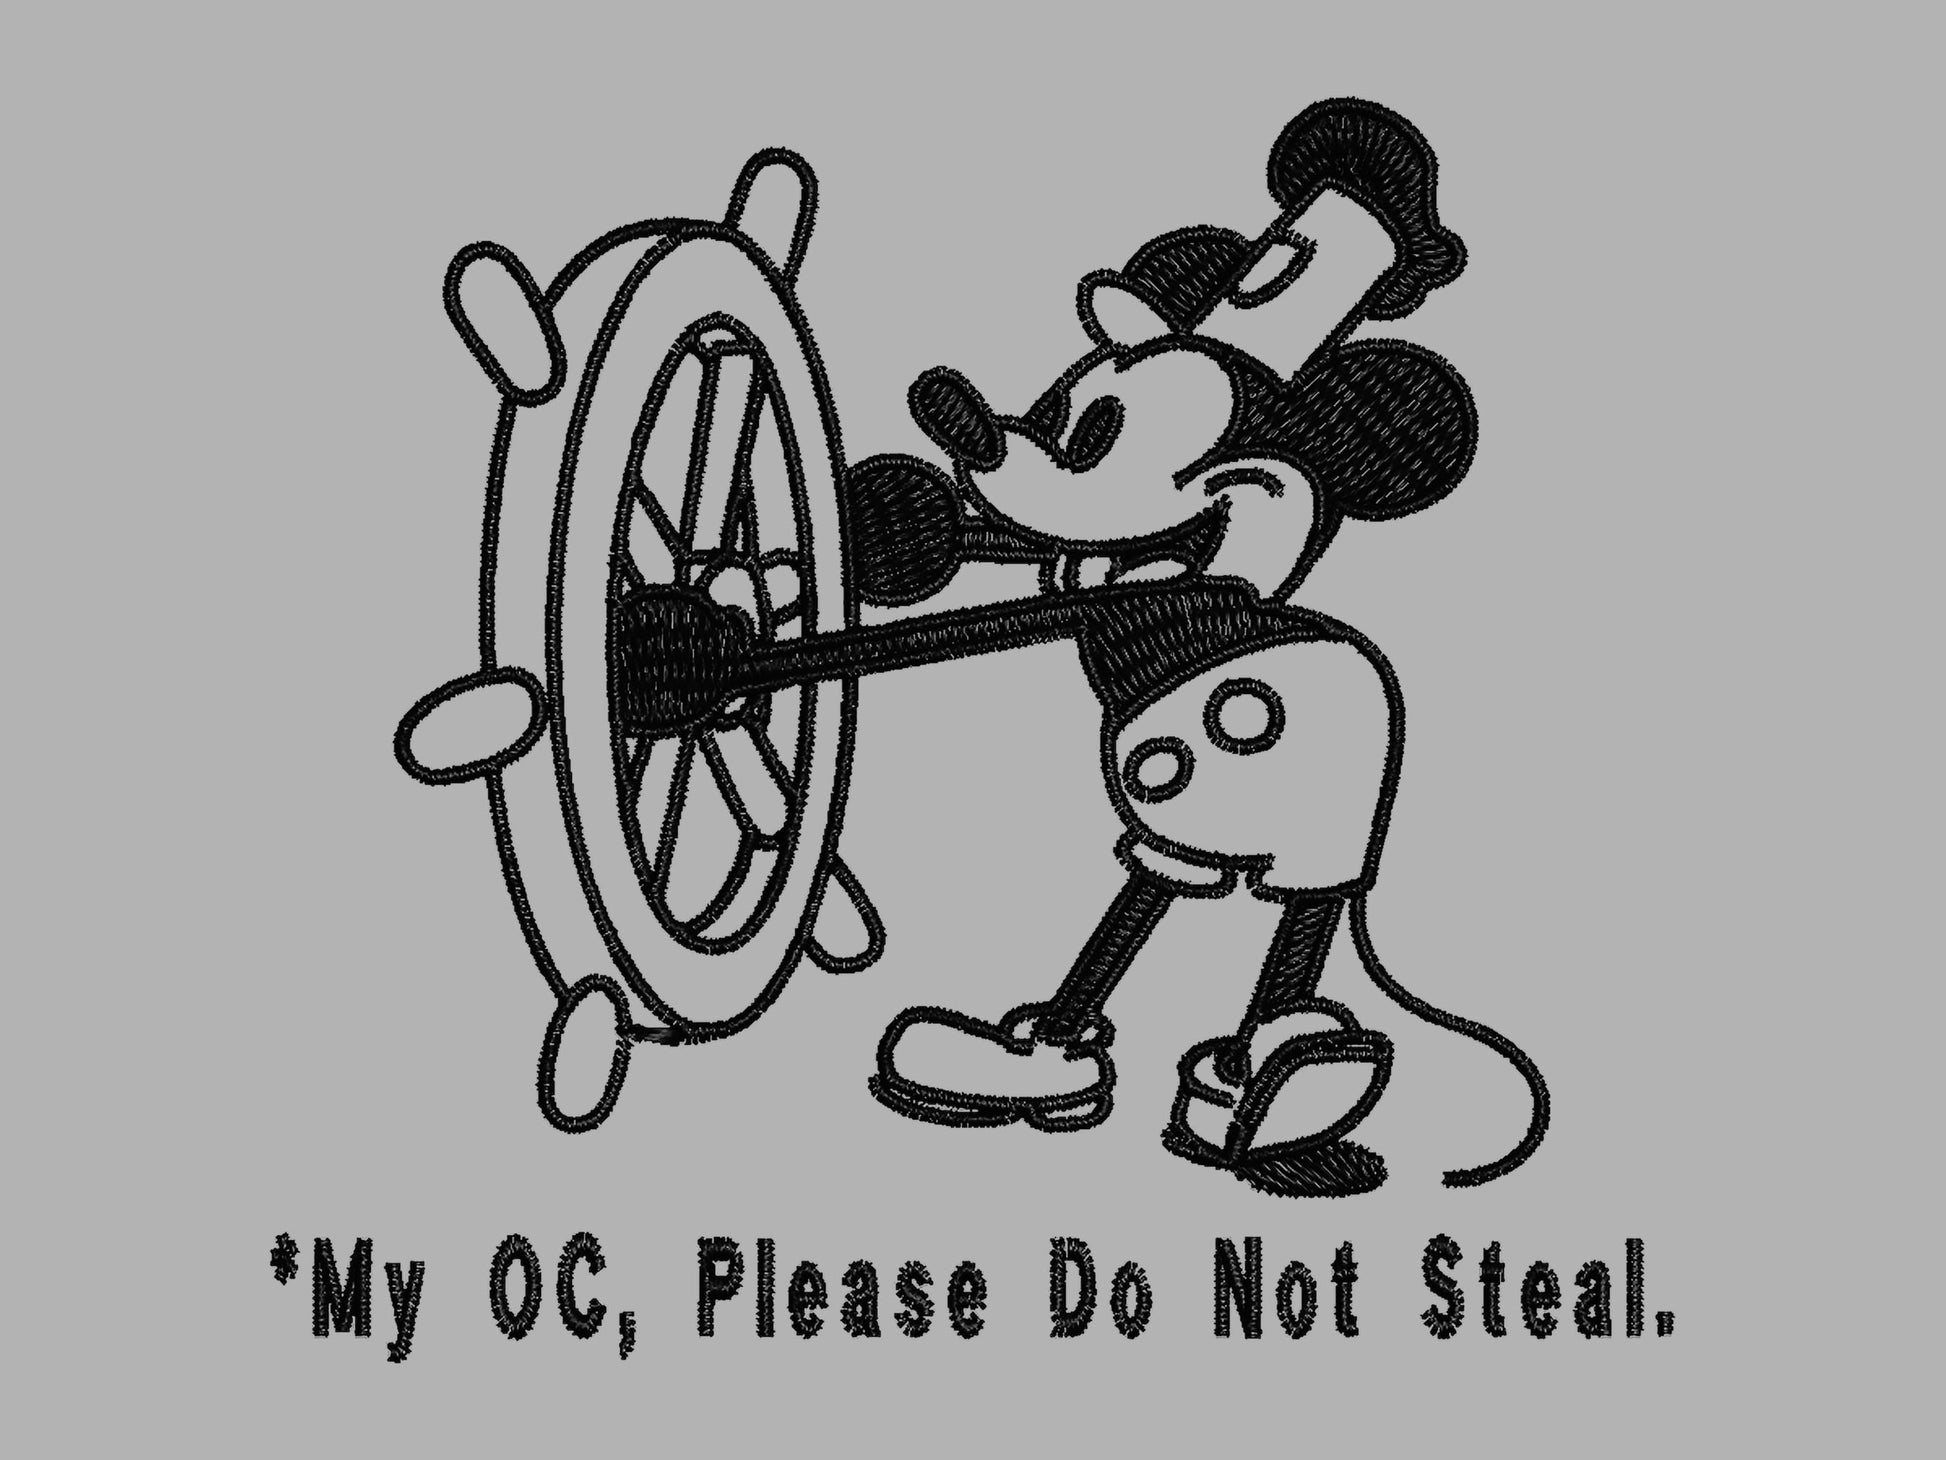 Embroidered Black Steamboat Willie Design From Disney's original Mickey Mouse Animation with the text *My OC, Please Don't Steal.